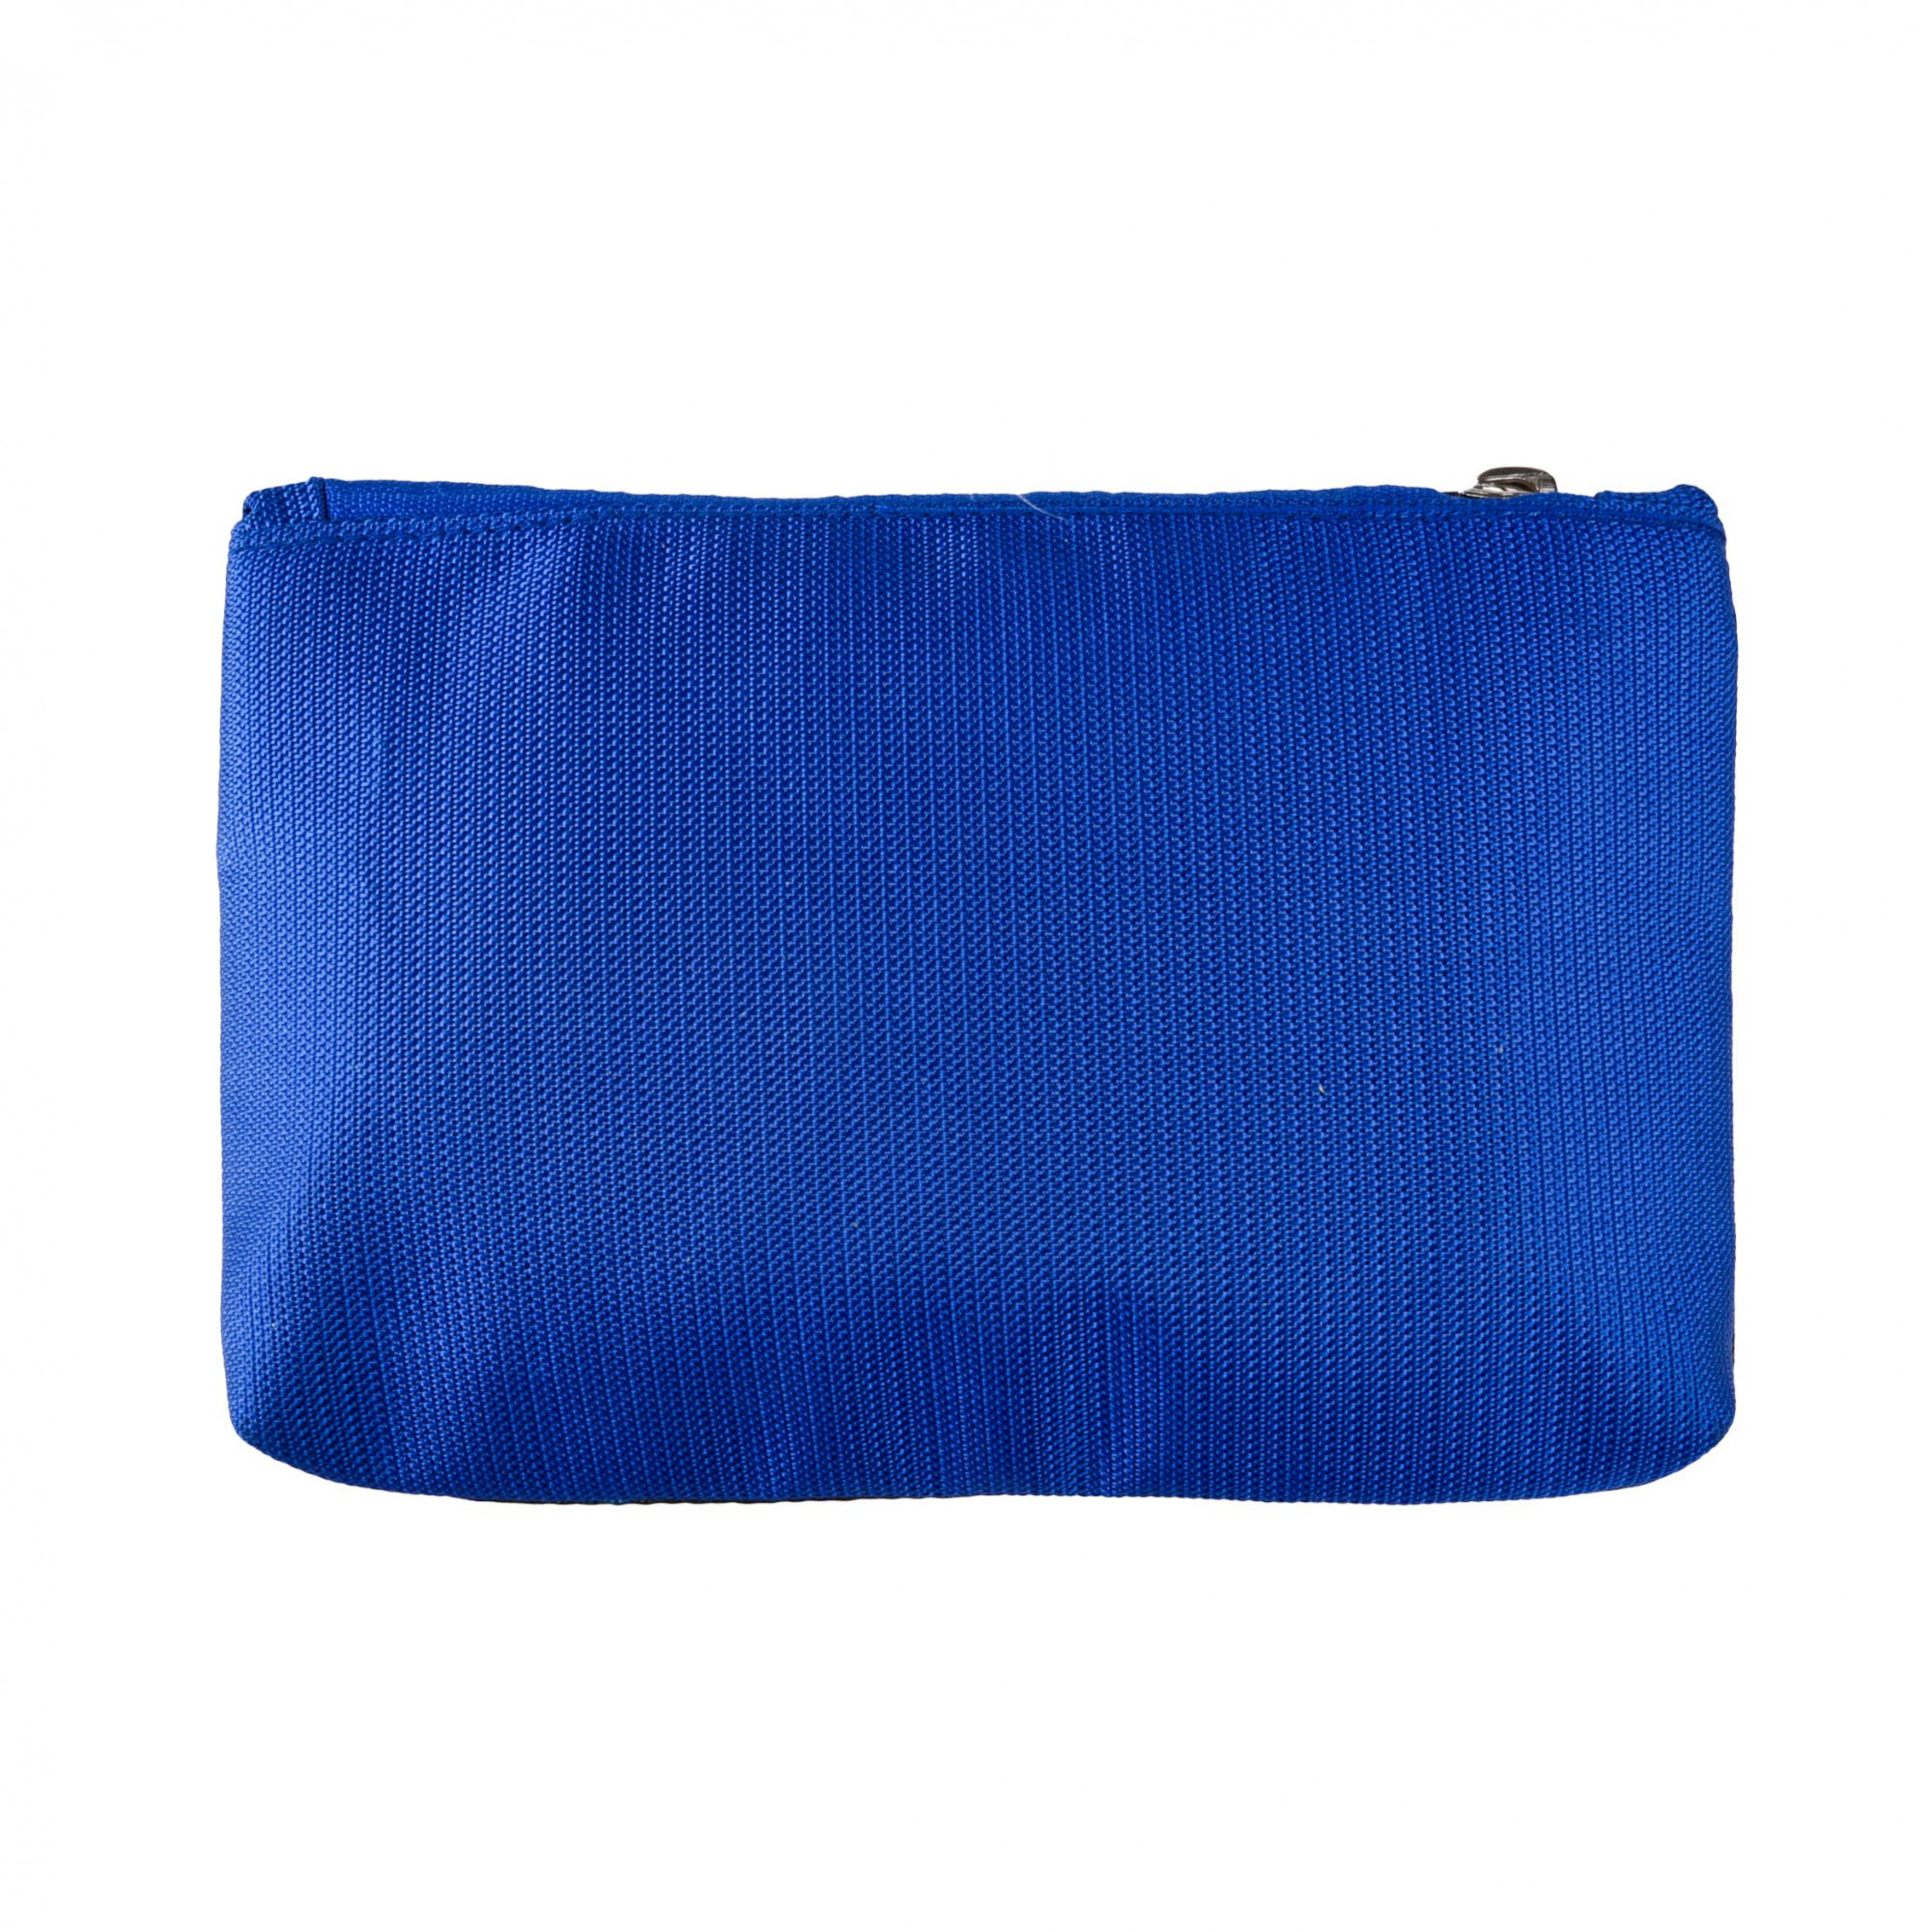 Kuber Industries Pencil Pouch | Square Stationary Pouch | Pen-Pencil Box for Kids | School Geometry Pouch | Pencil Utility Bag | Zipper Pencil Organizer | Royal Blue & Red